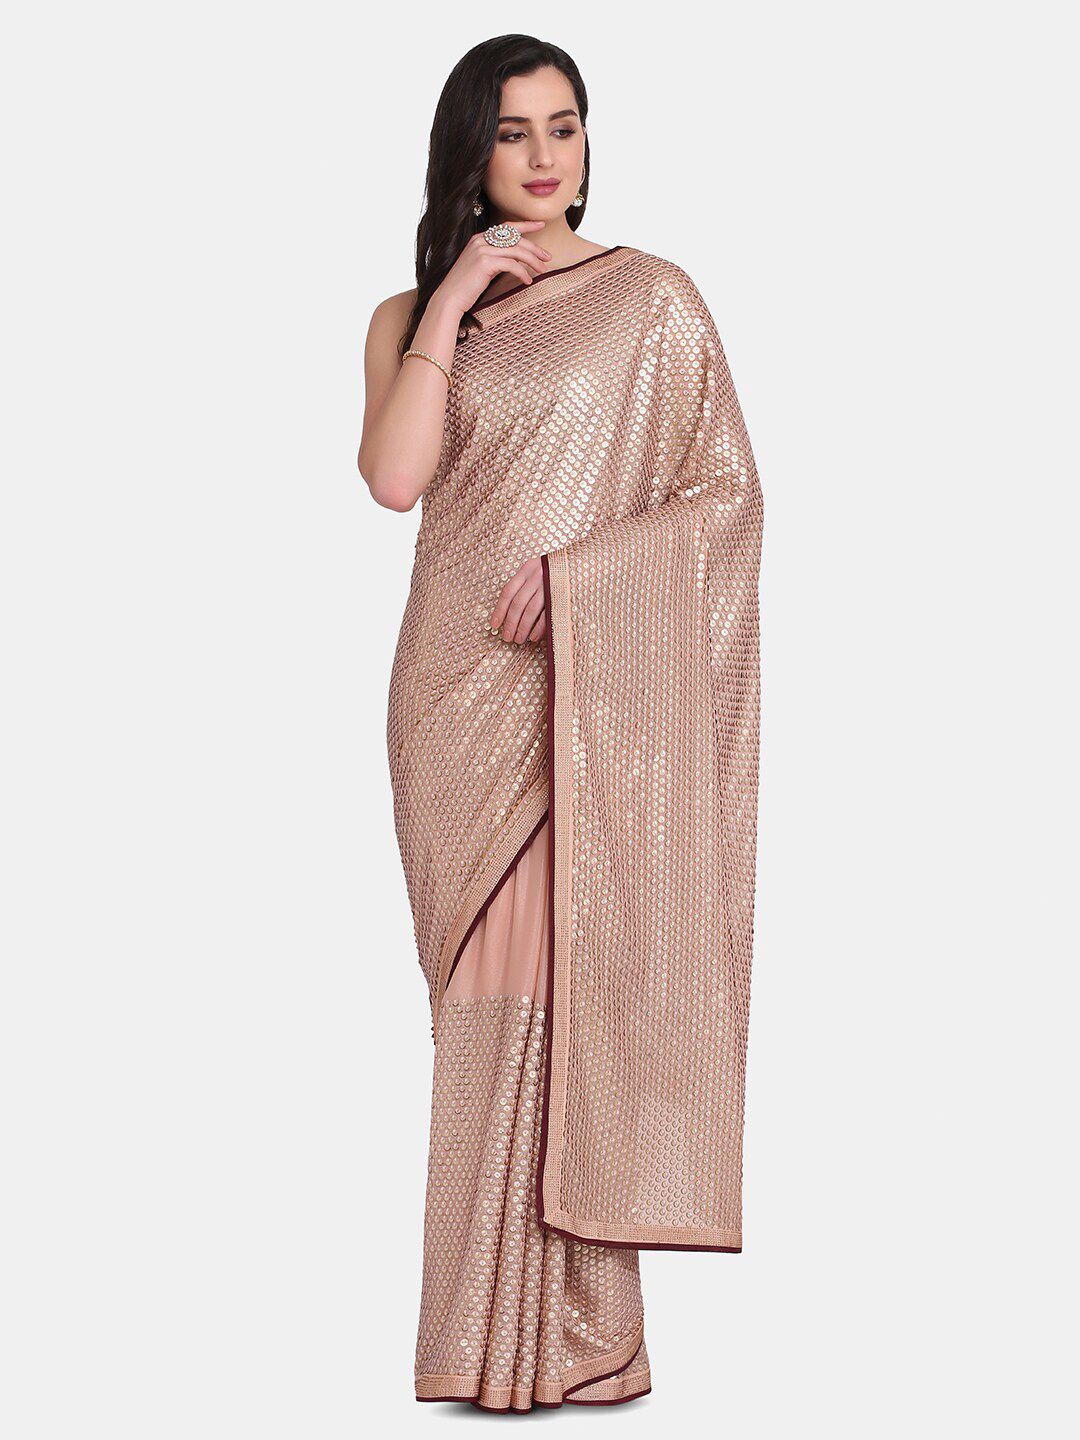 BOMBAY SELECTIONS Peach-Coloured & Maroon Embellished Sequinned Satin Saree Price in India